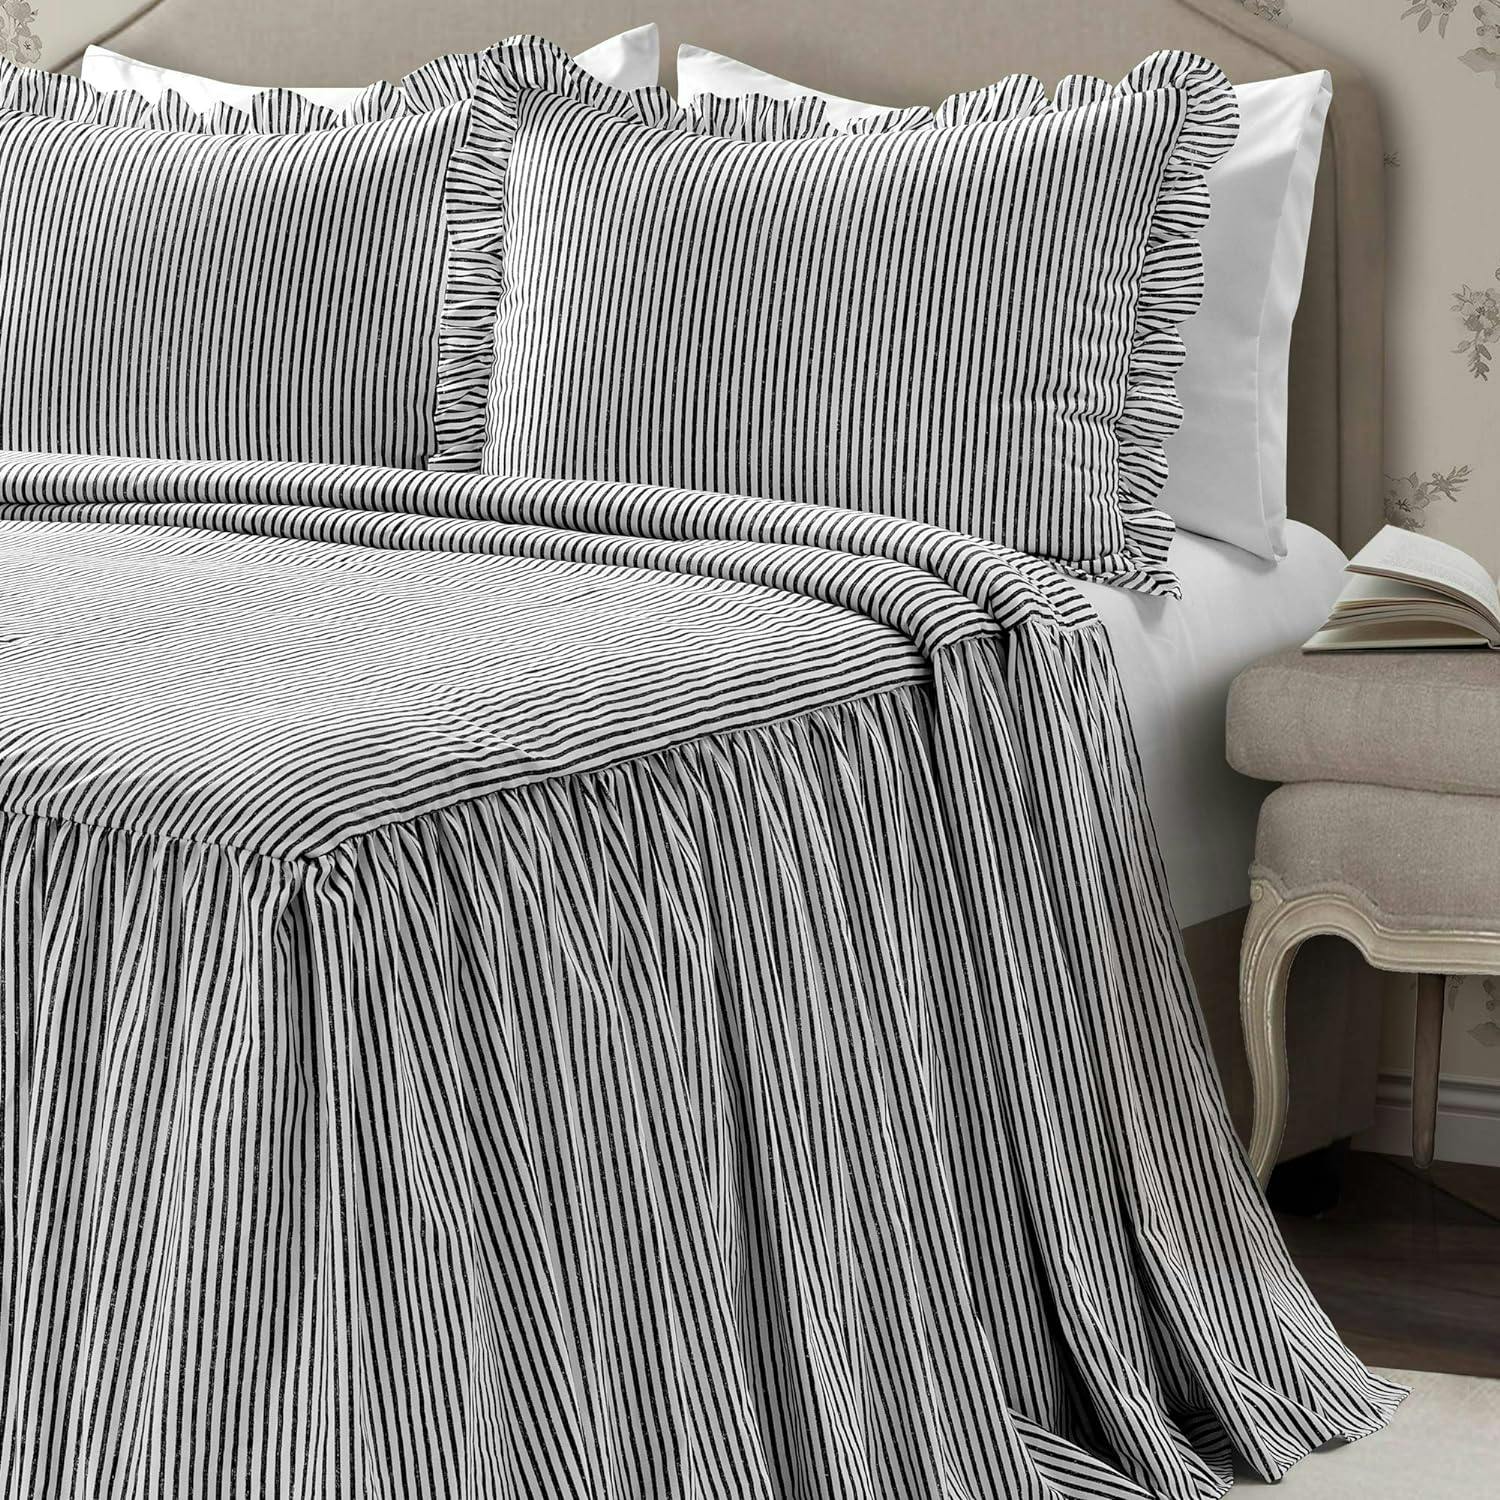 Elegant Black Ruffle-Edged Queen Bedspread Set with Pinstripes